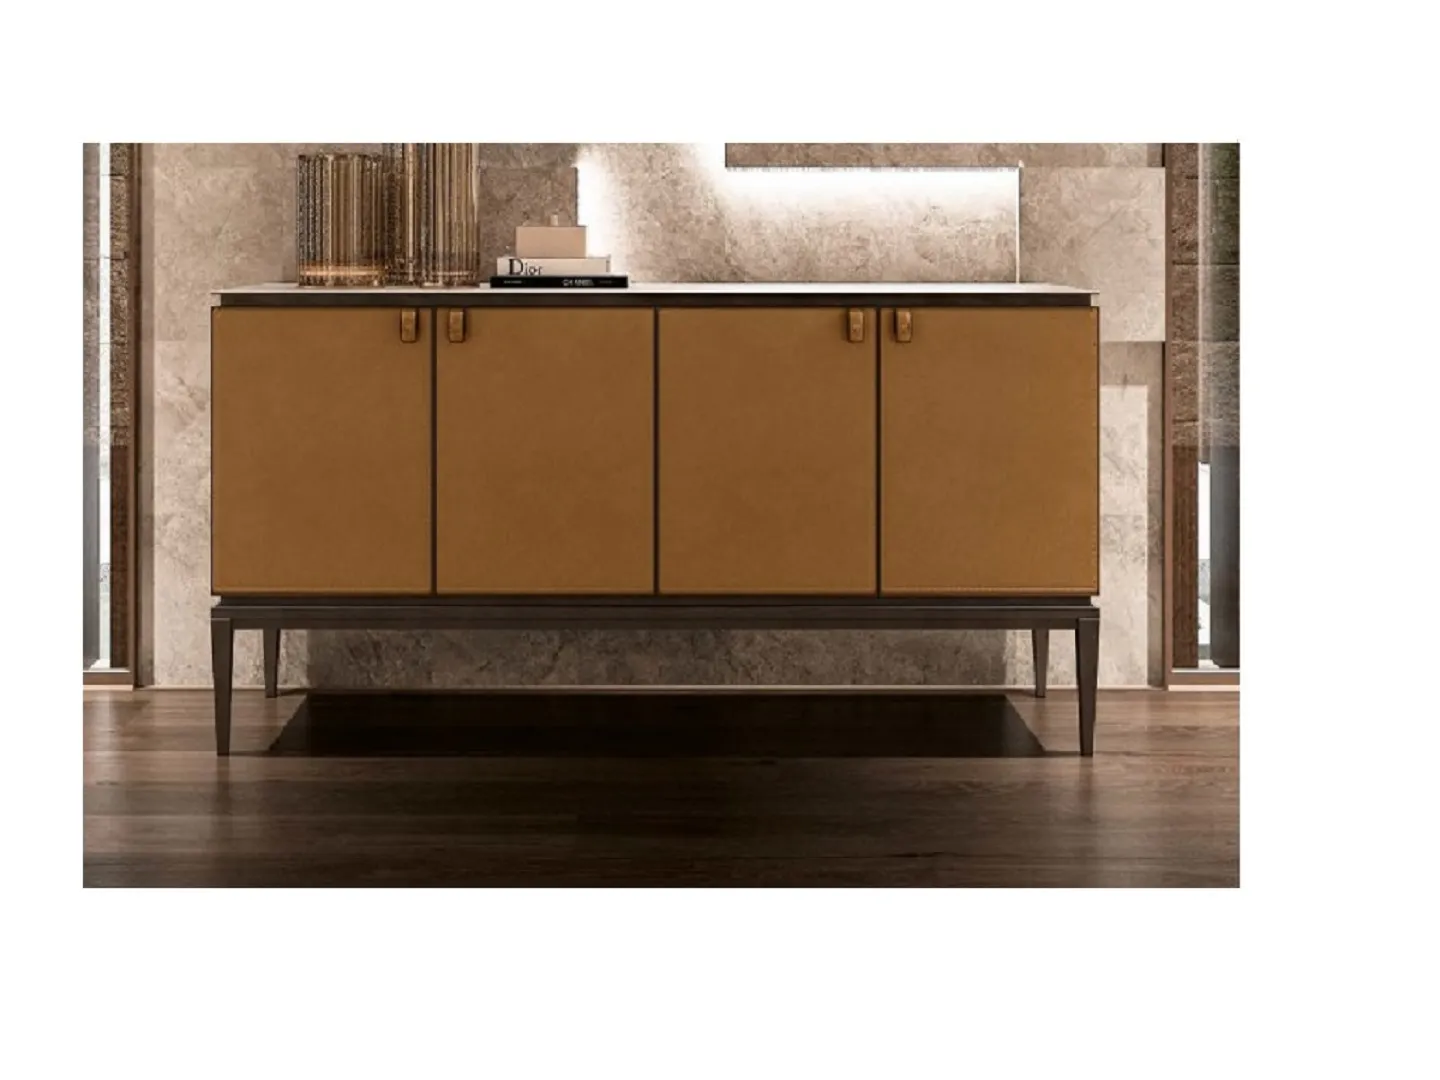 CPRN Homood - Sideboard with saddle leather doors